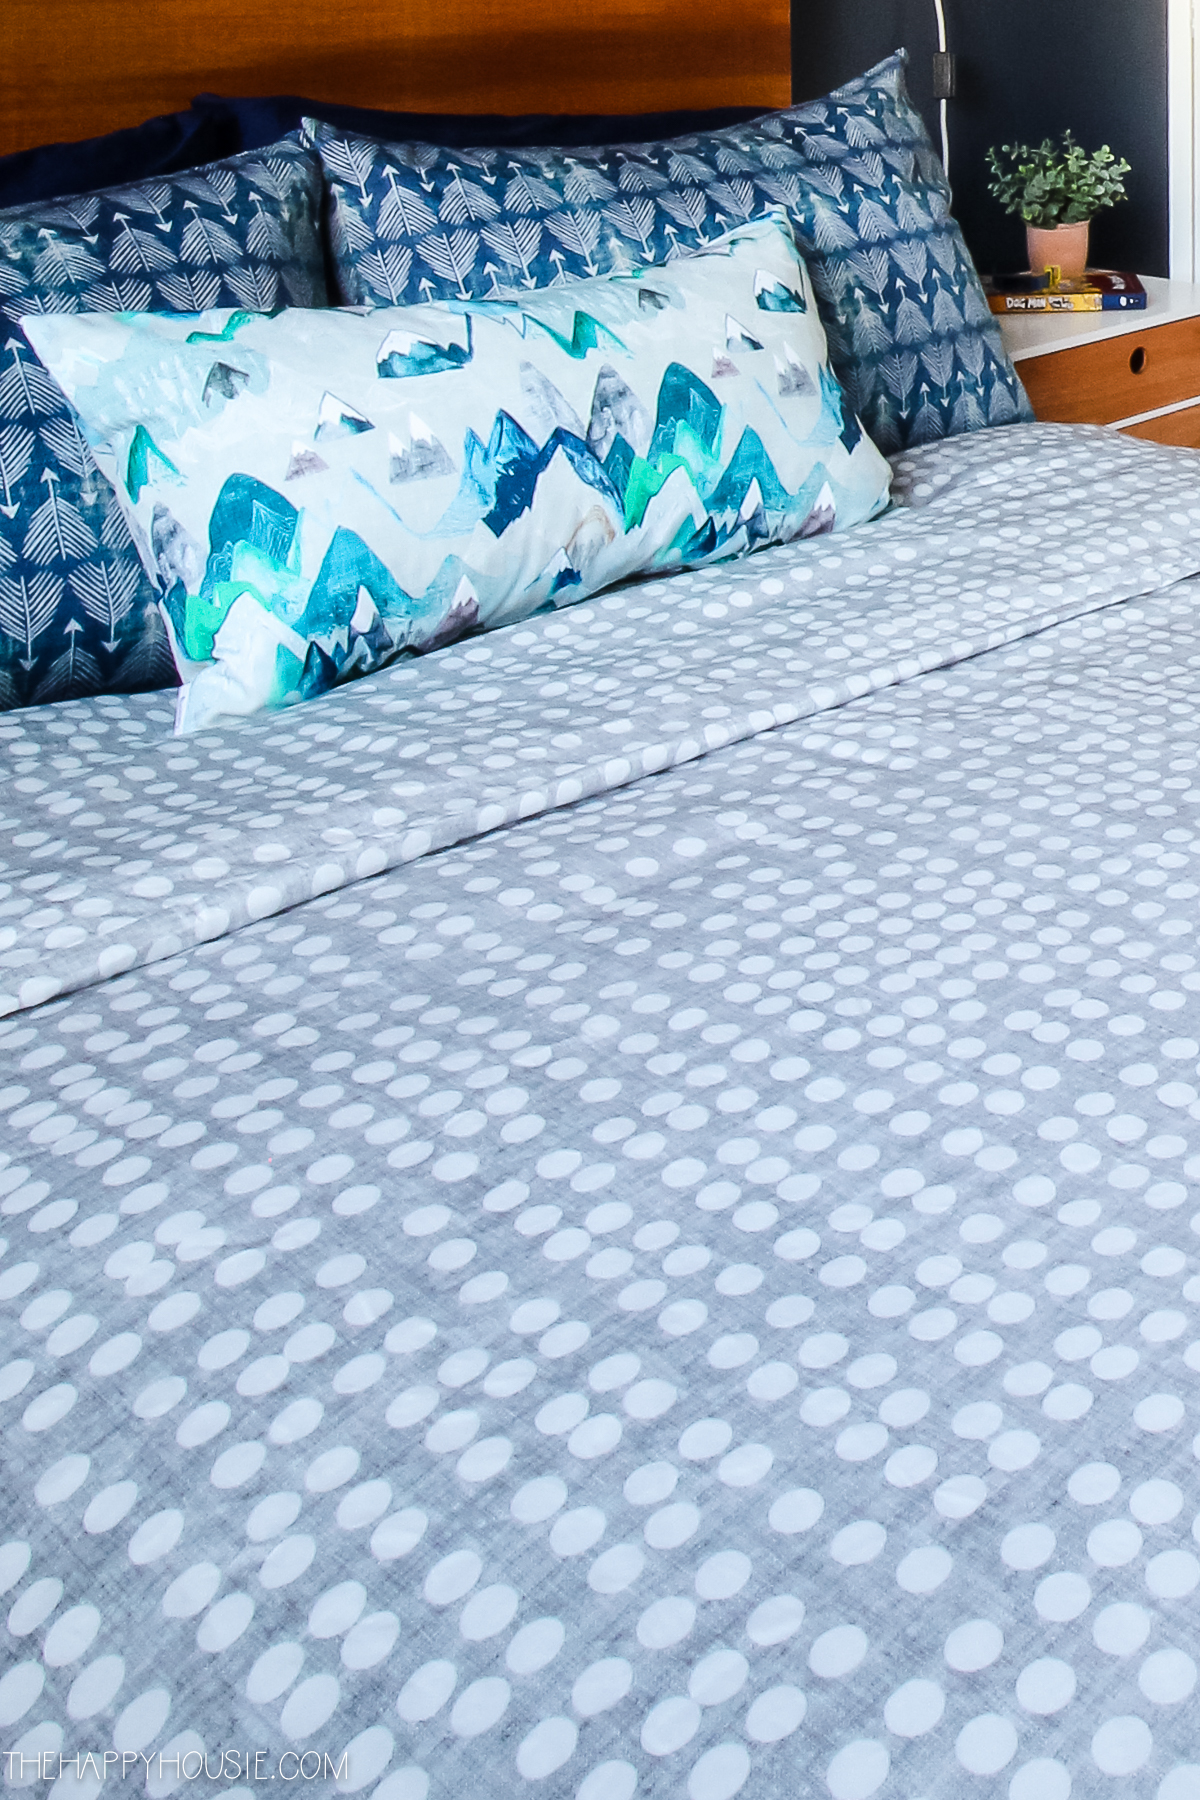 Blue and white bedspread.